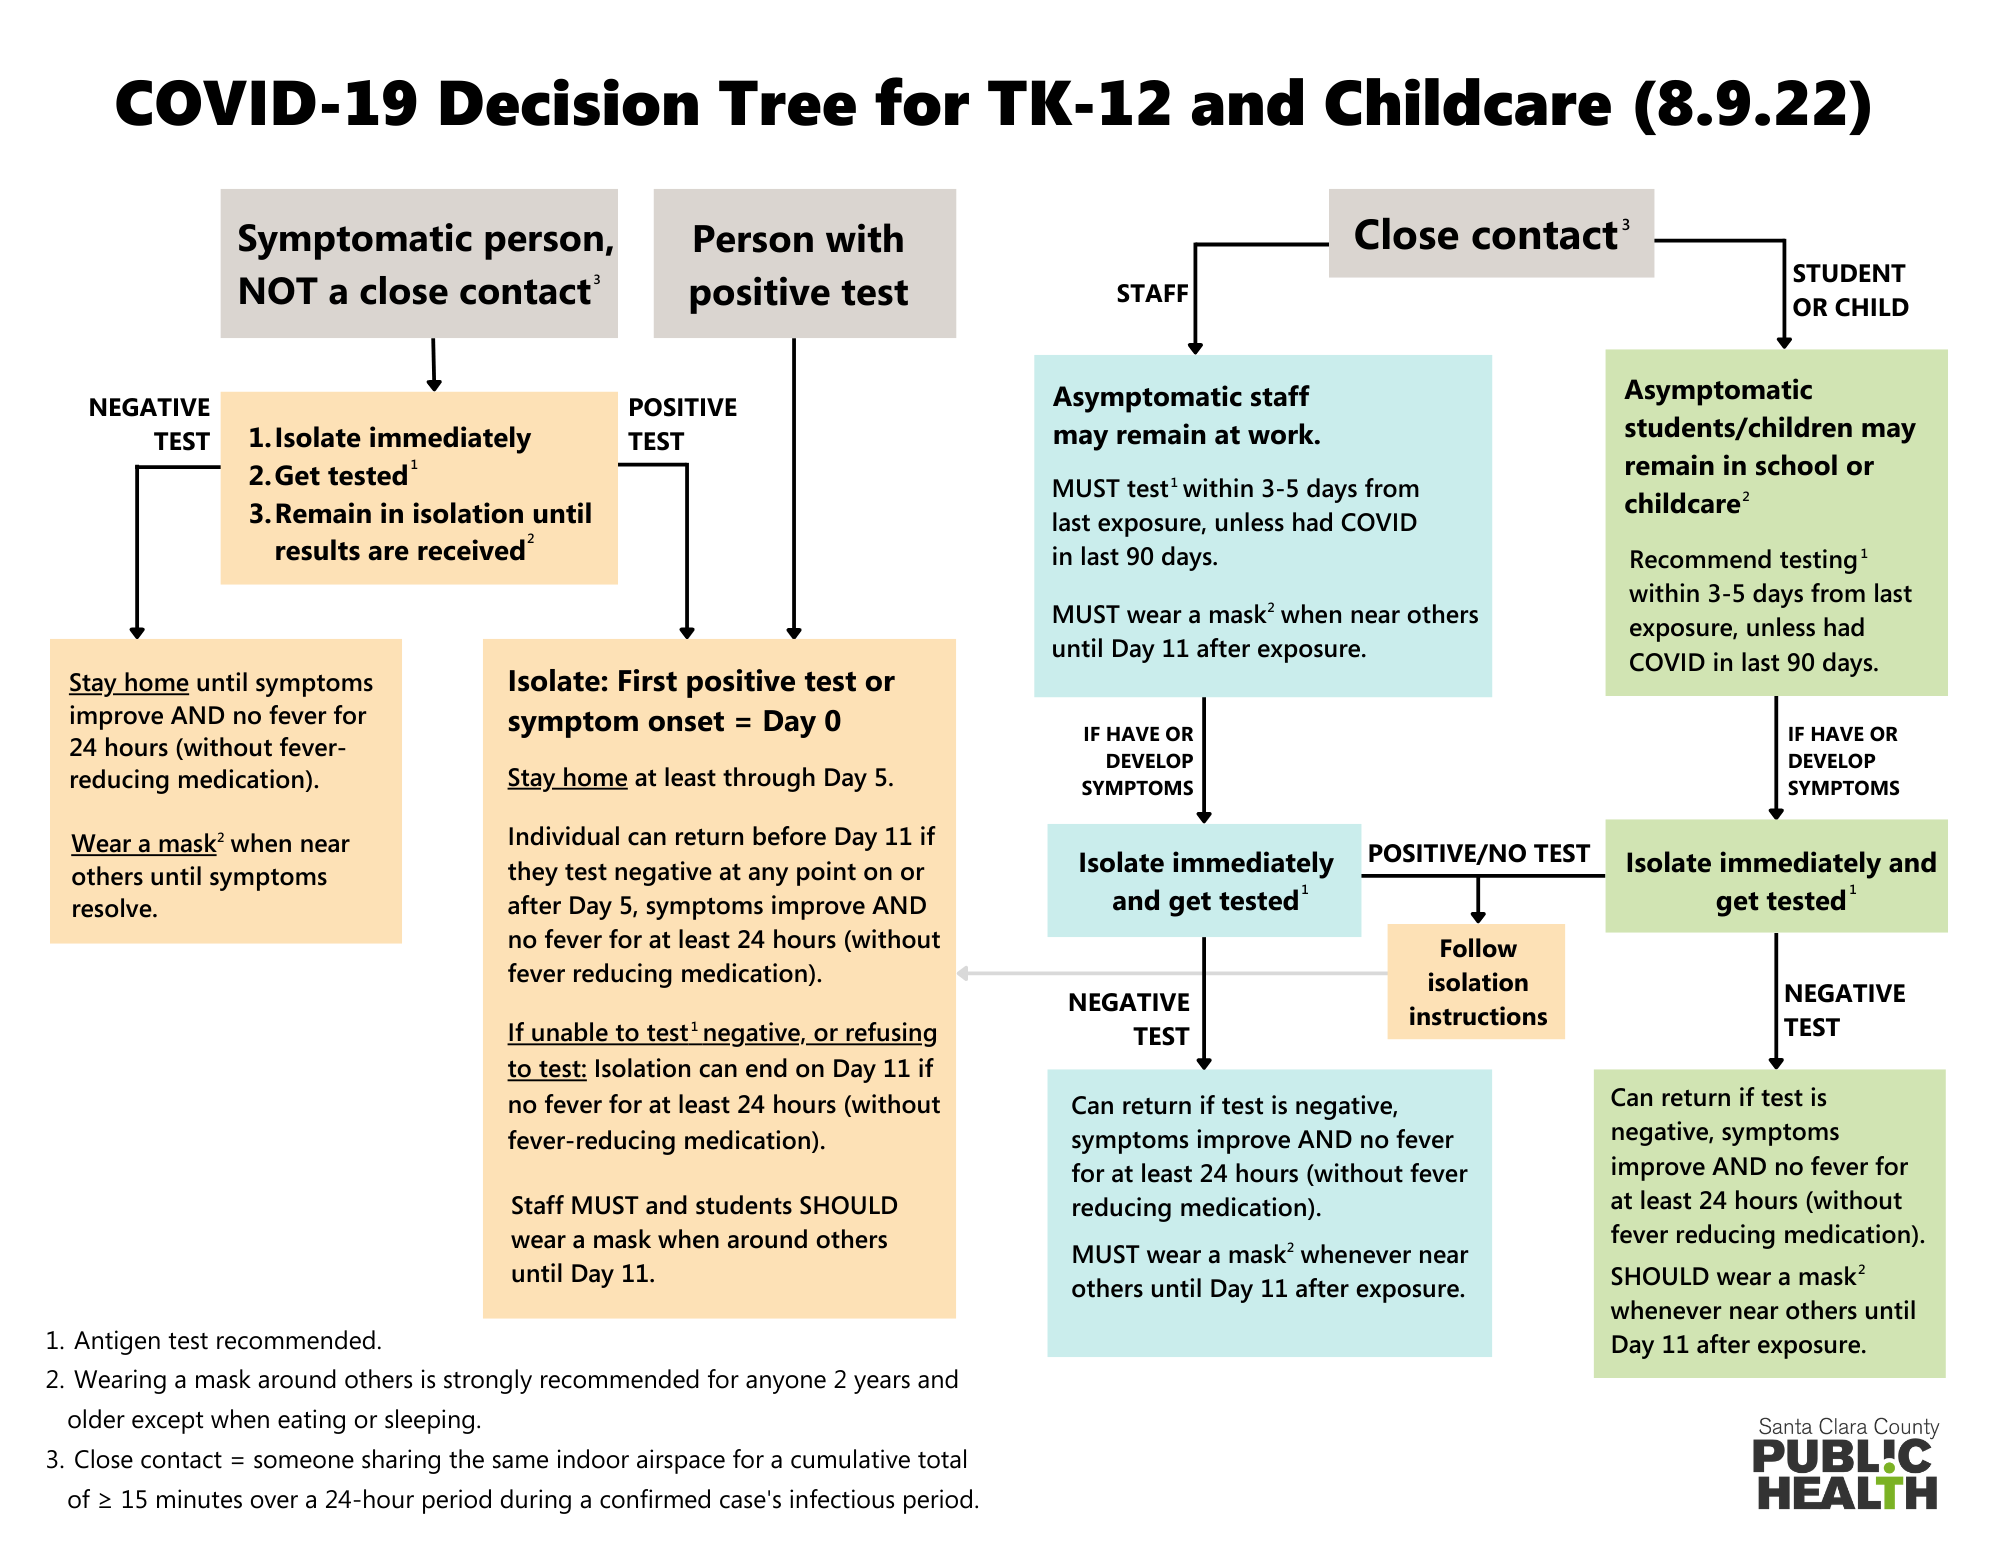 COVID-19 Decision Tree_TK-12 and Childcare